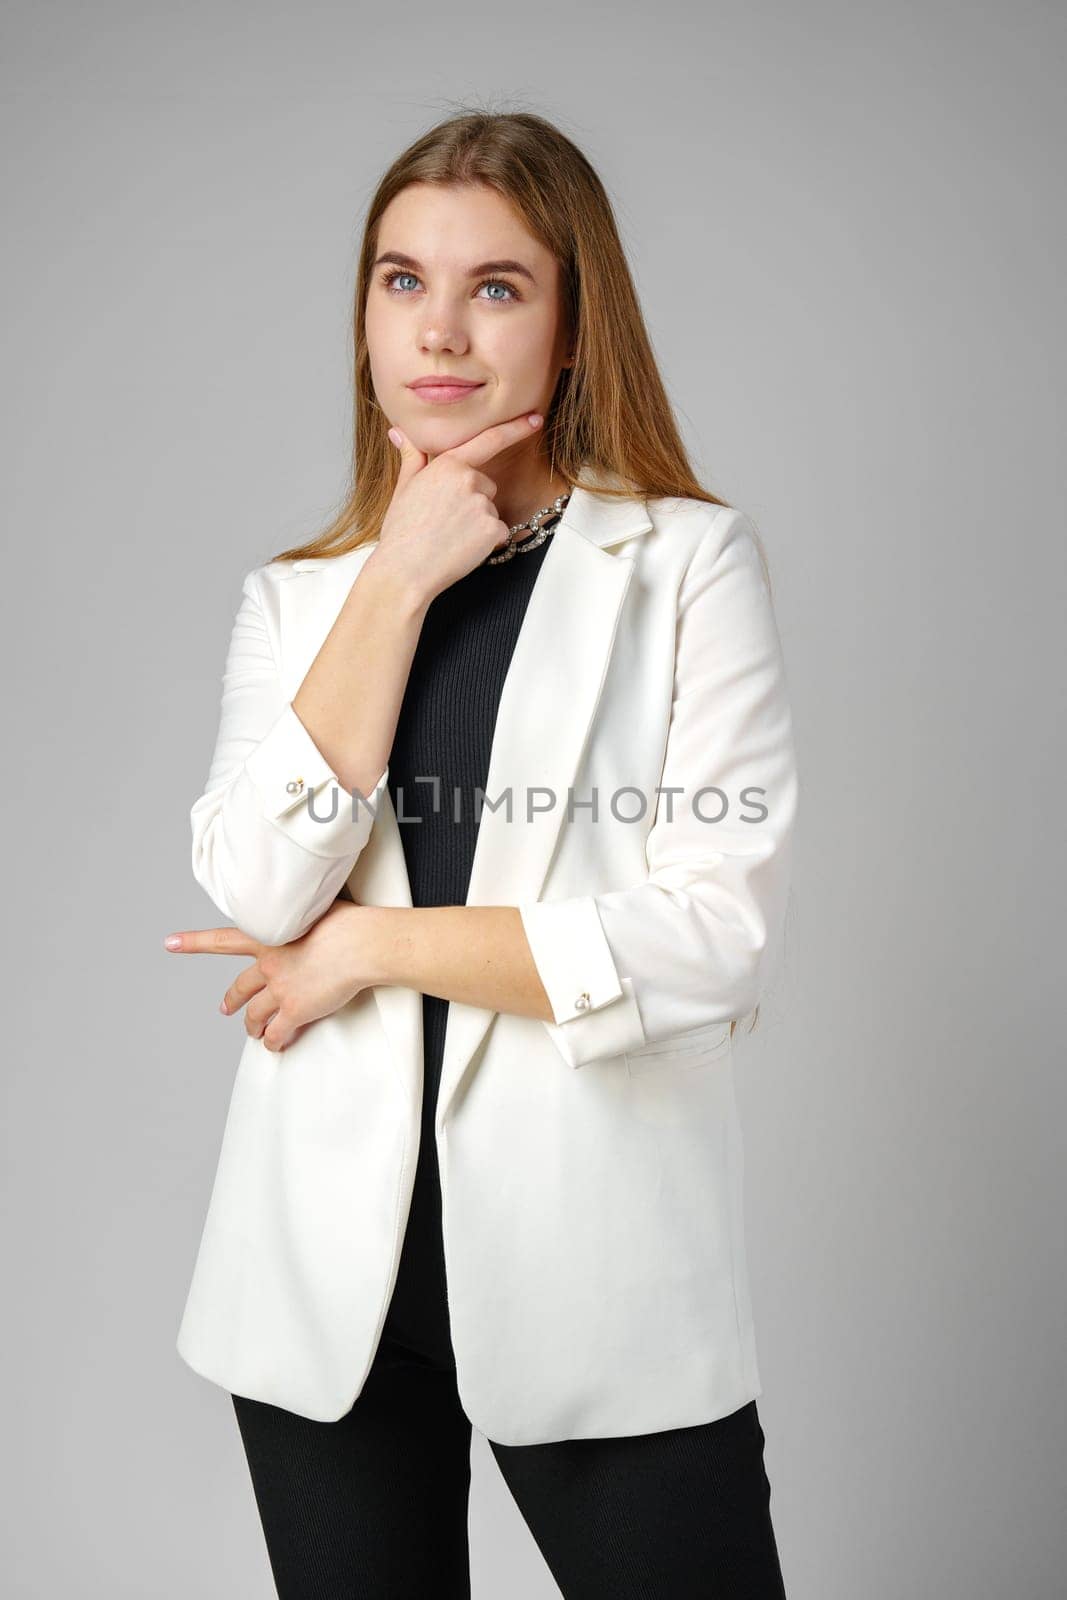 Thoughtful Young Woman in a Stylish White Blazer Posing on gray background close up